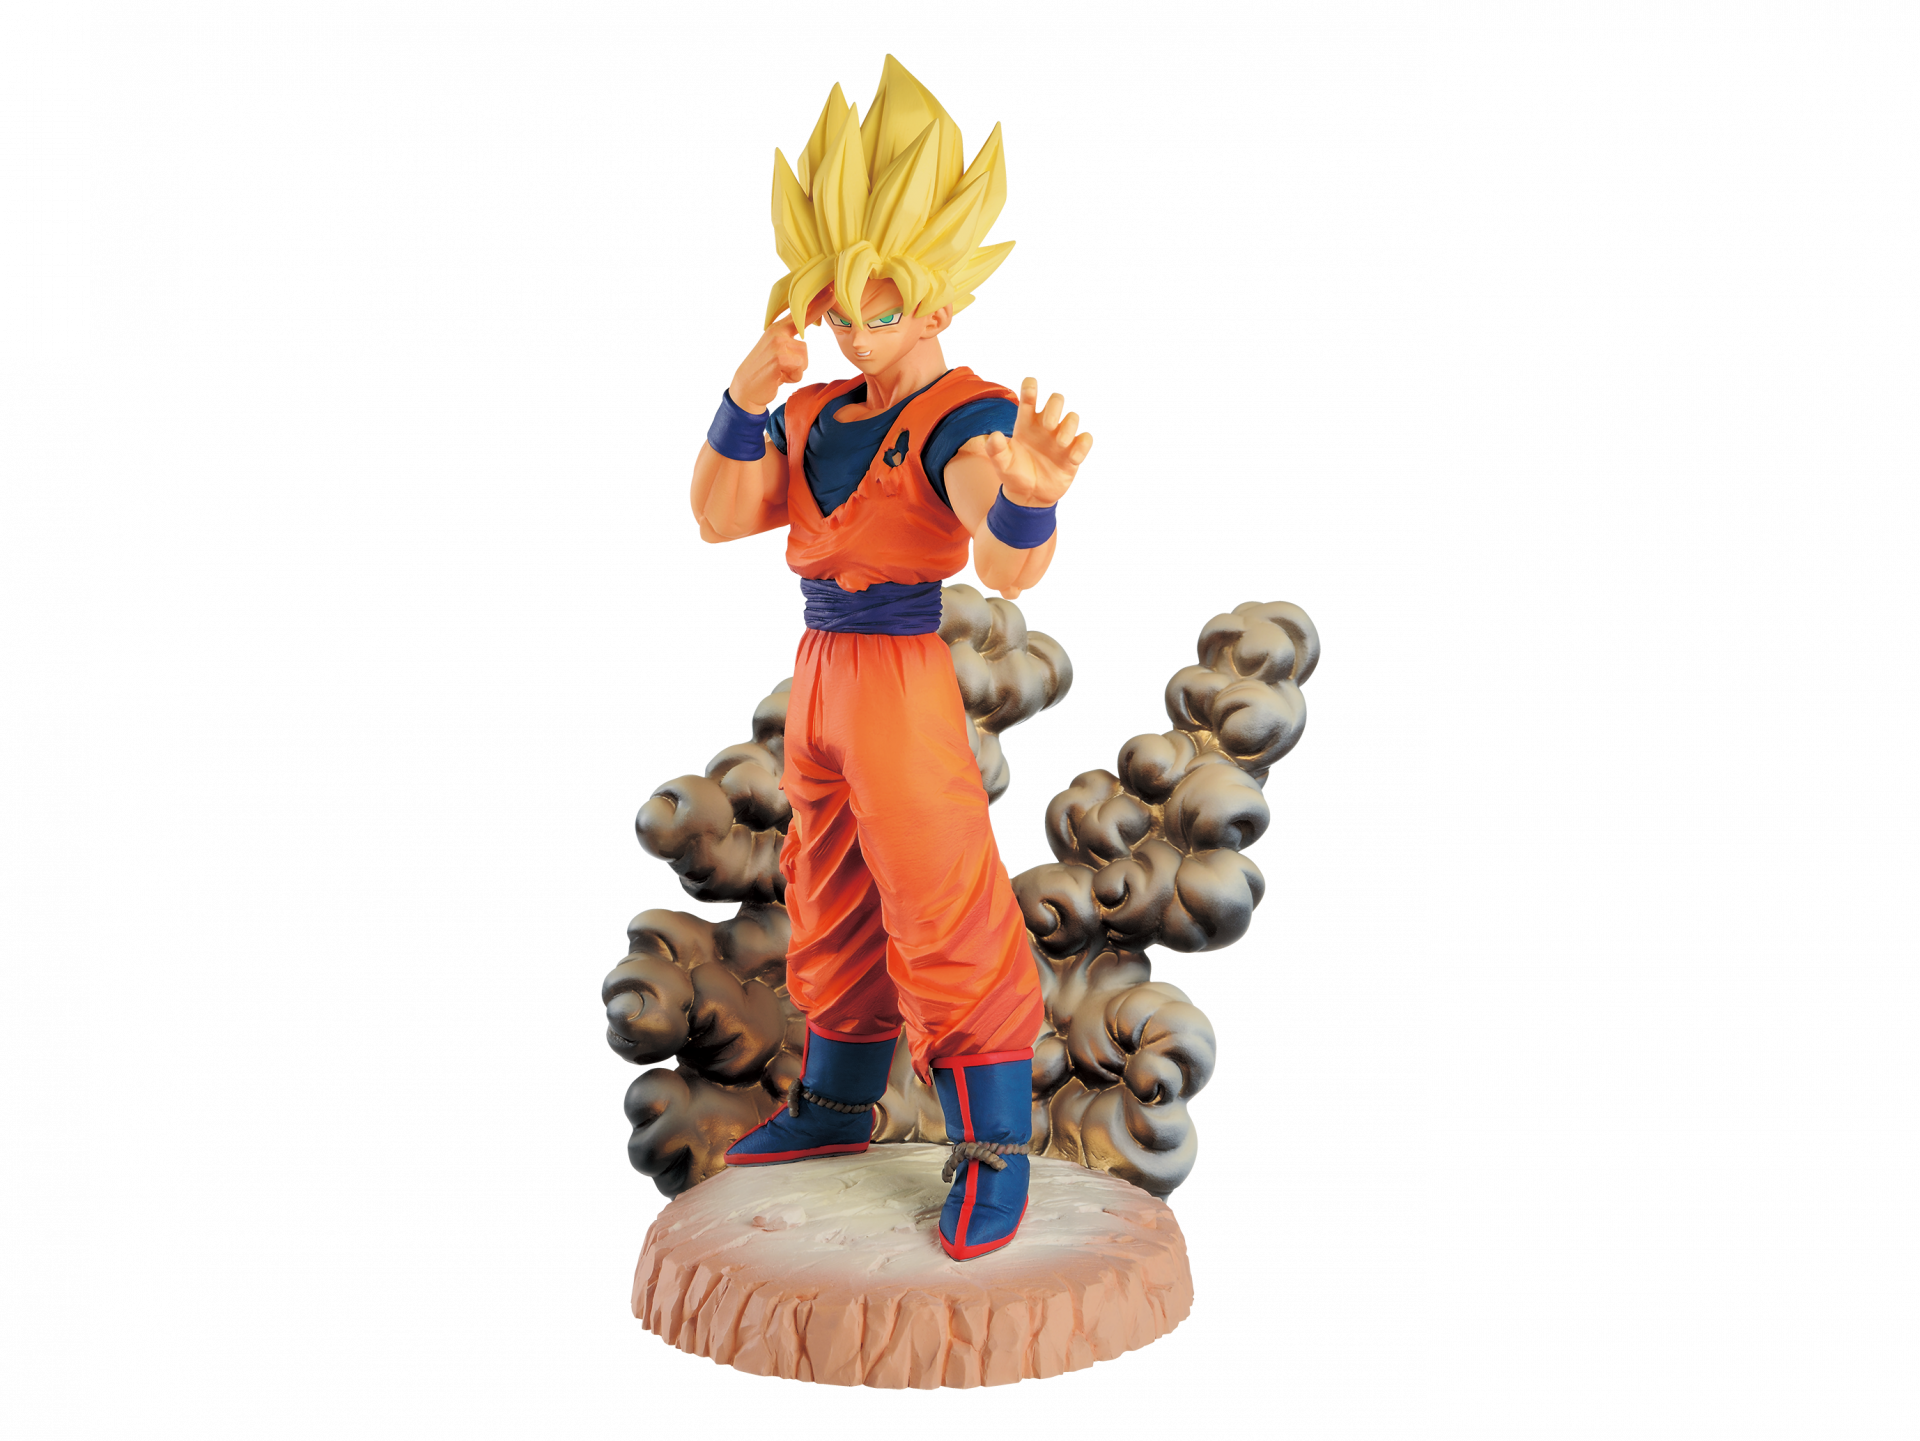 New Crane-Game Prize! Goku + Special-Effect Stand Arrives!